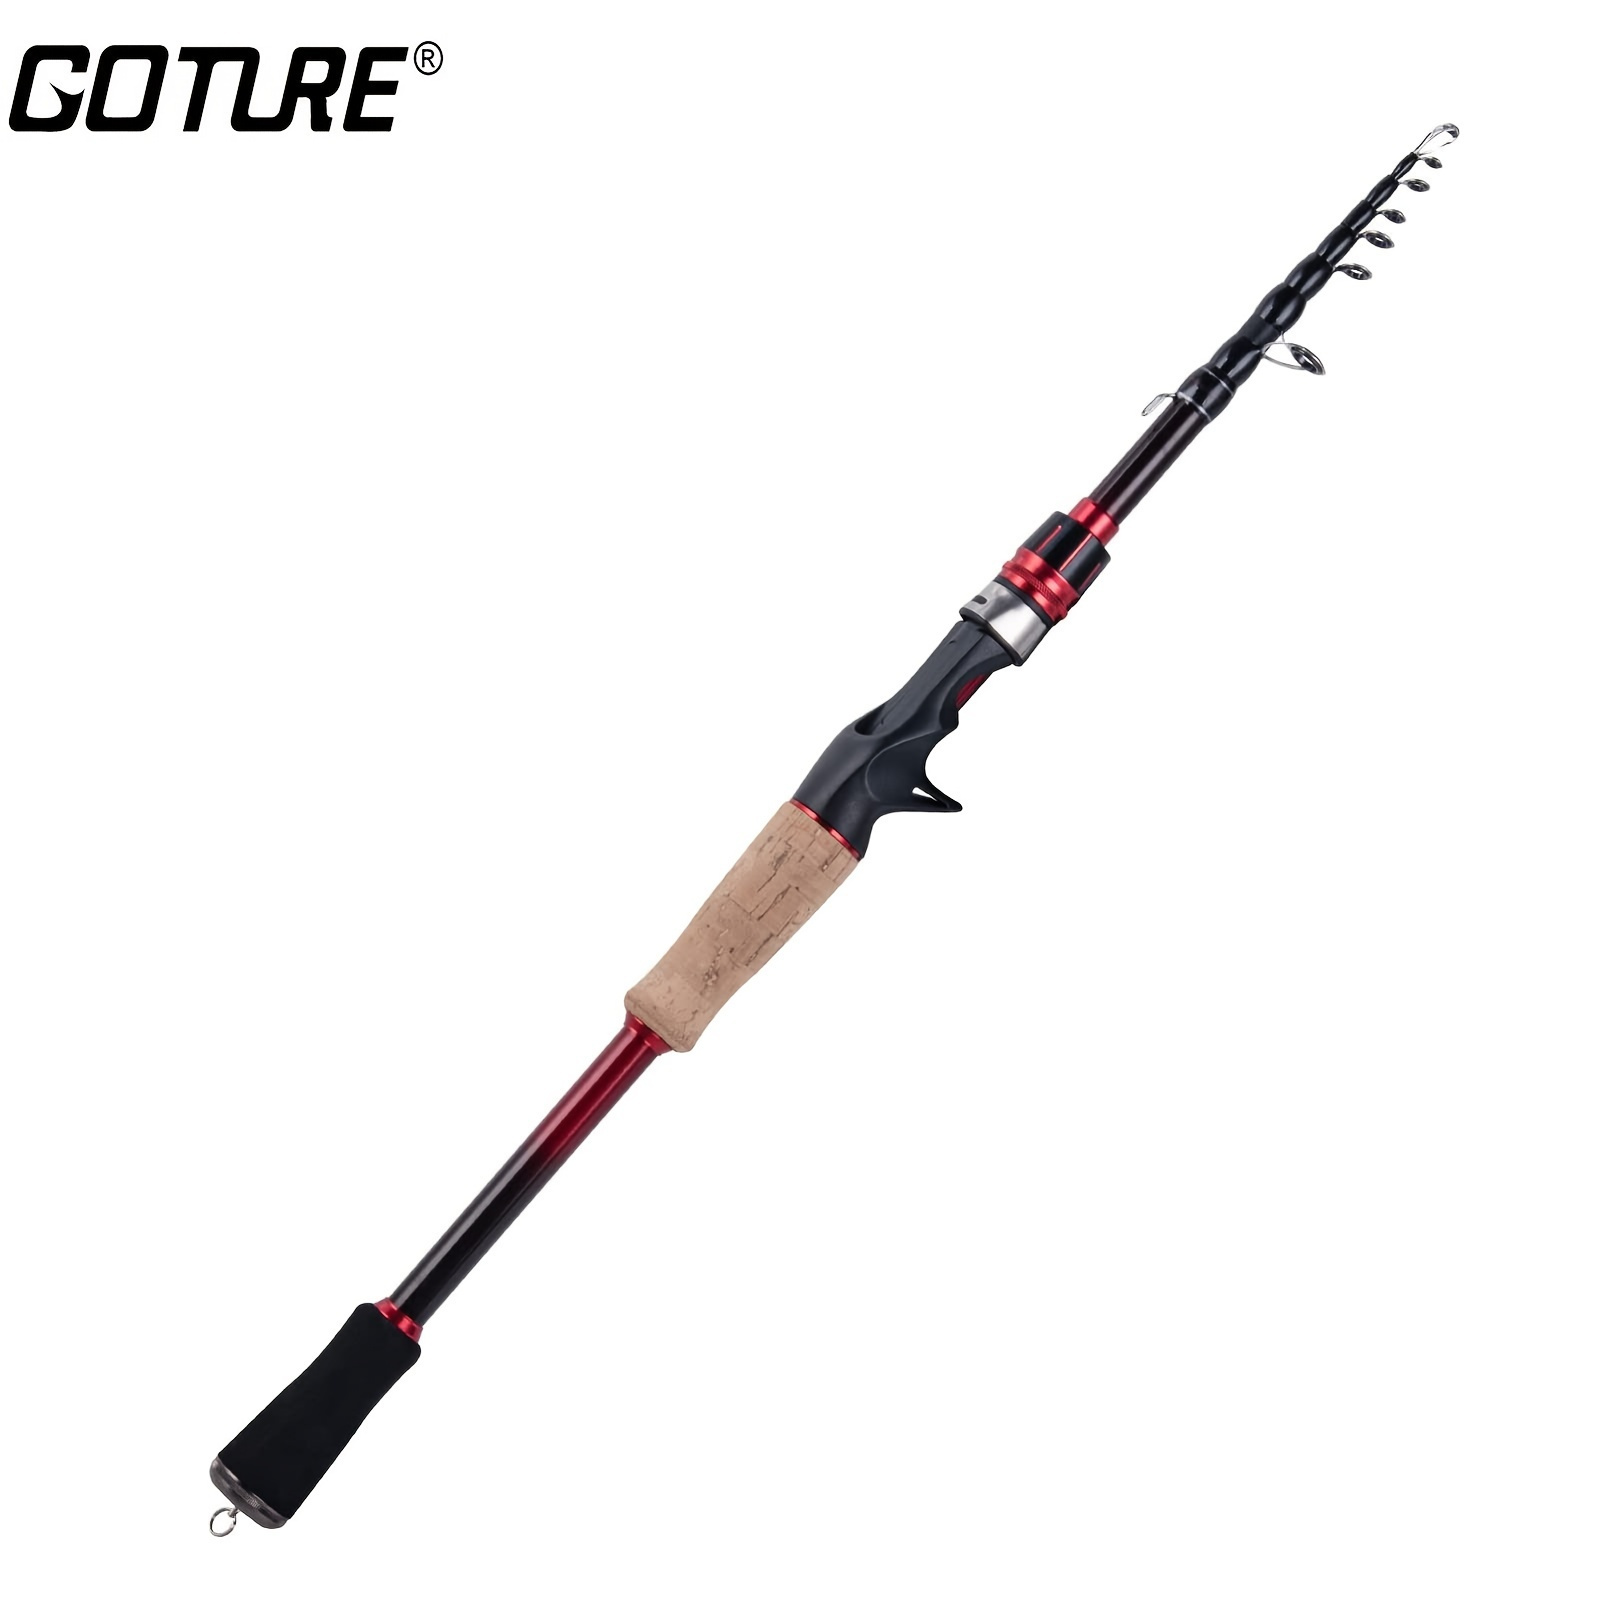 Goture Telescopic Casting Fishing Rod - Lightweight And Portable With  Cork/eva Handle, 7-10 Feet - Perfect For Travel And Easy Storage, Check  Out Today's Deals Now